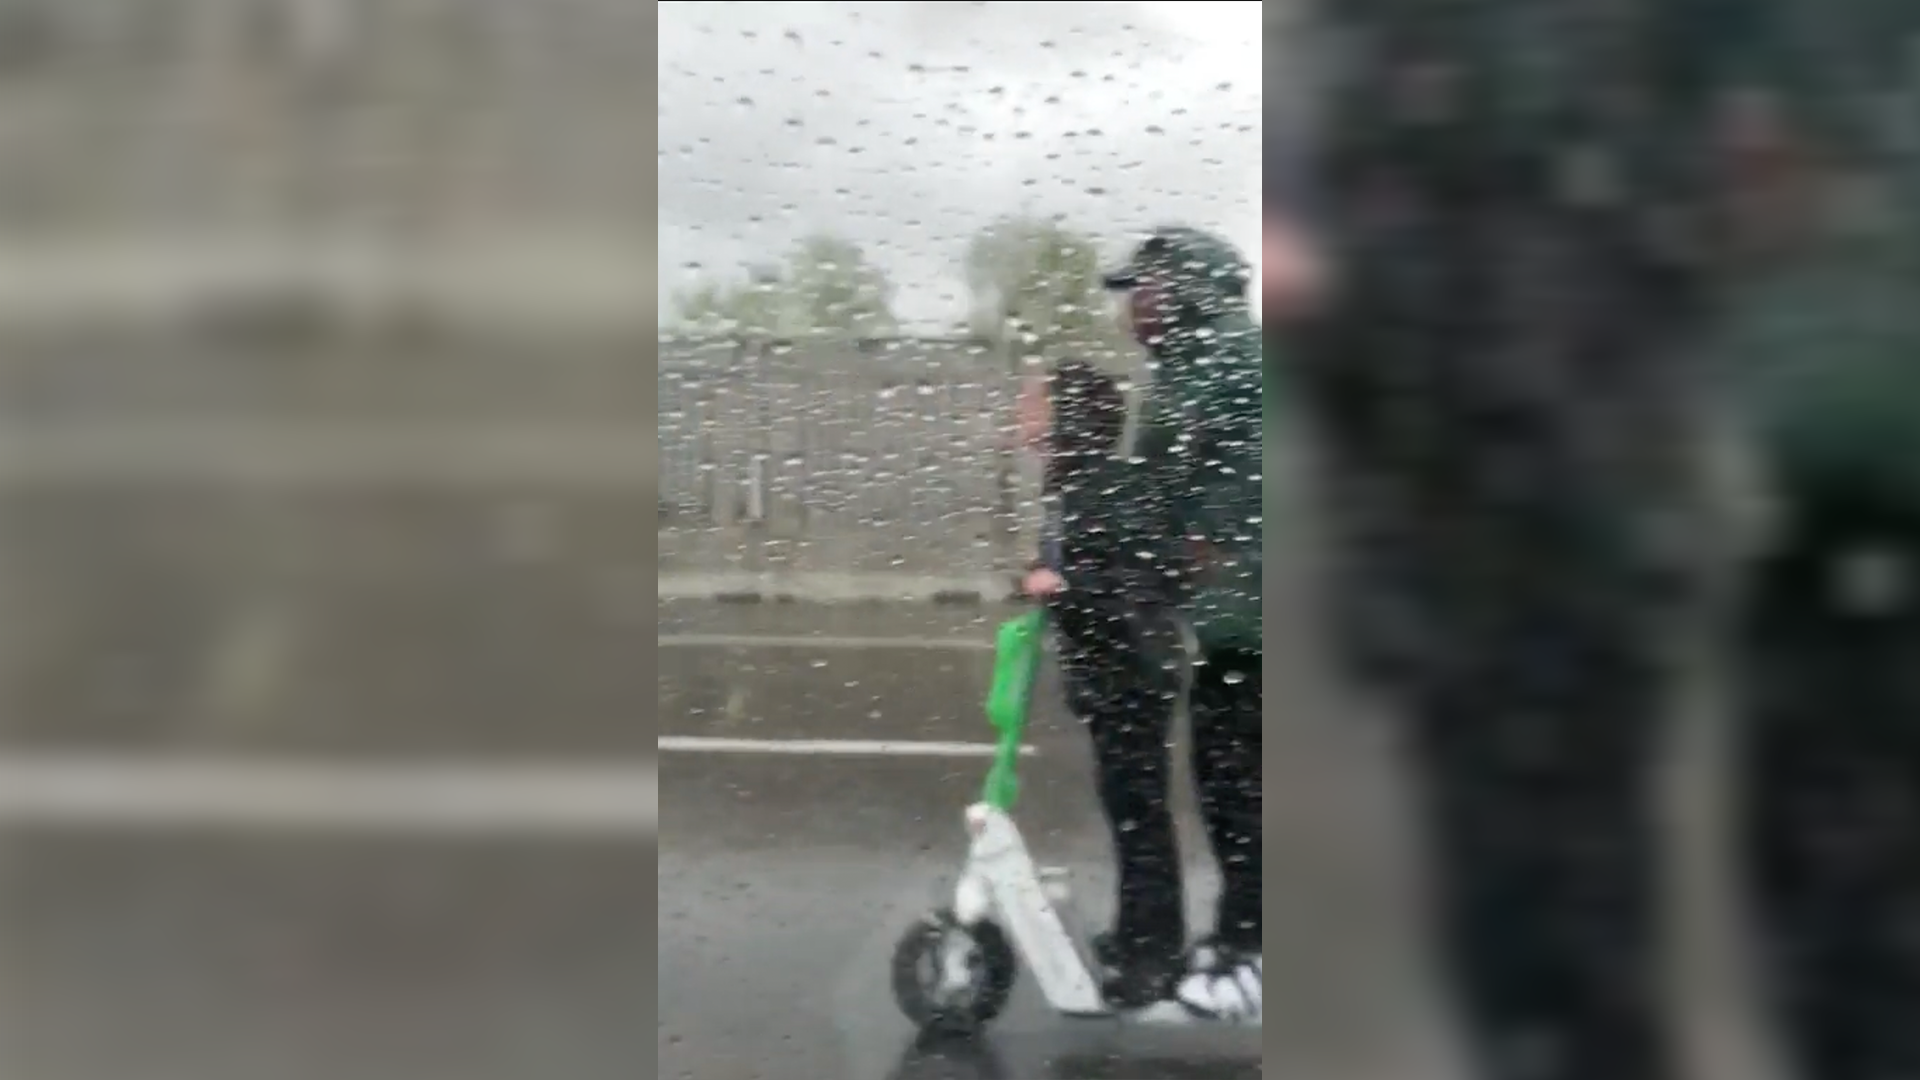 Maybe Don’t Ride a Lime Scooter on I-70 in a Rainstorm